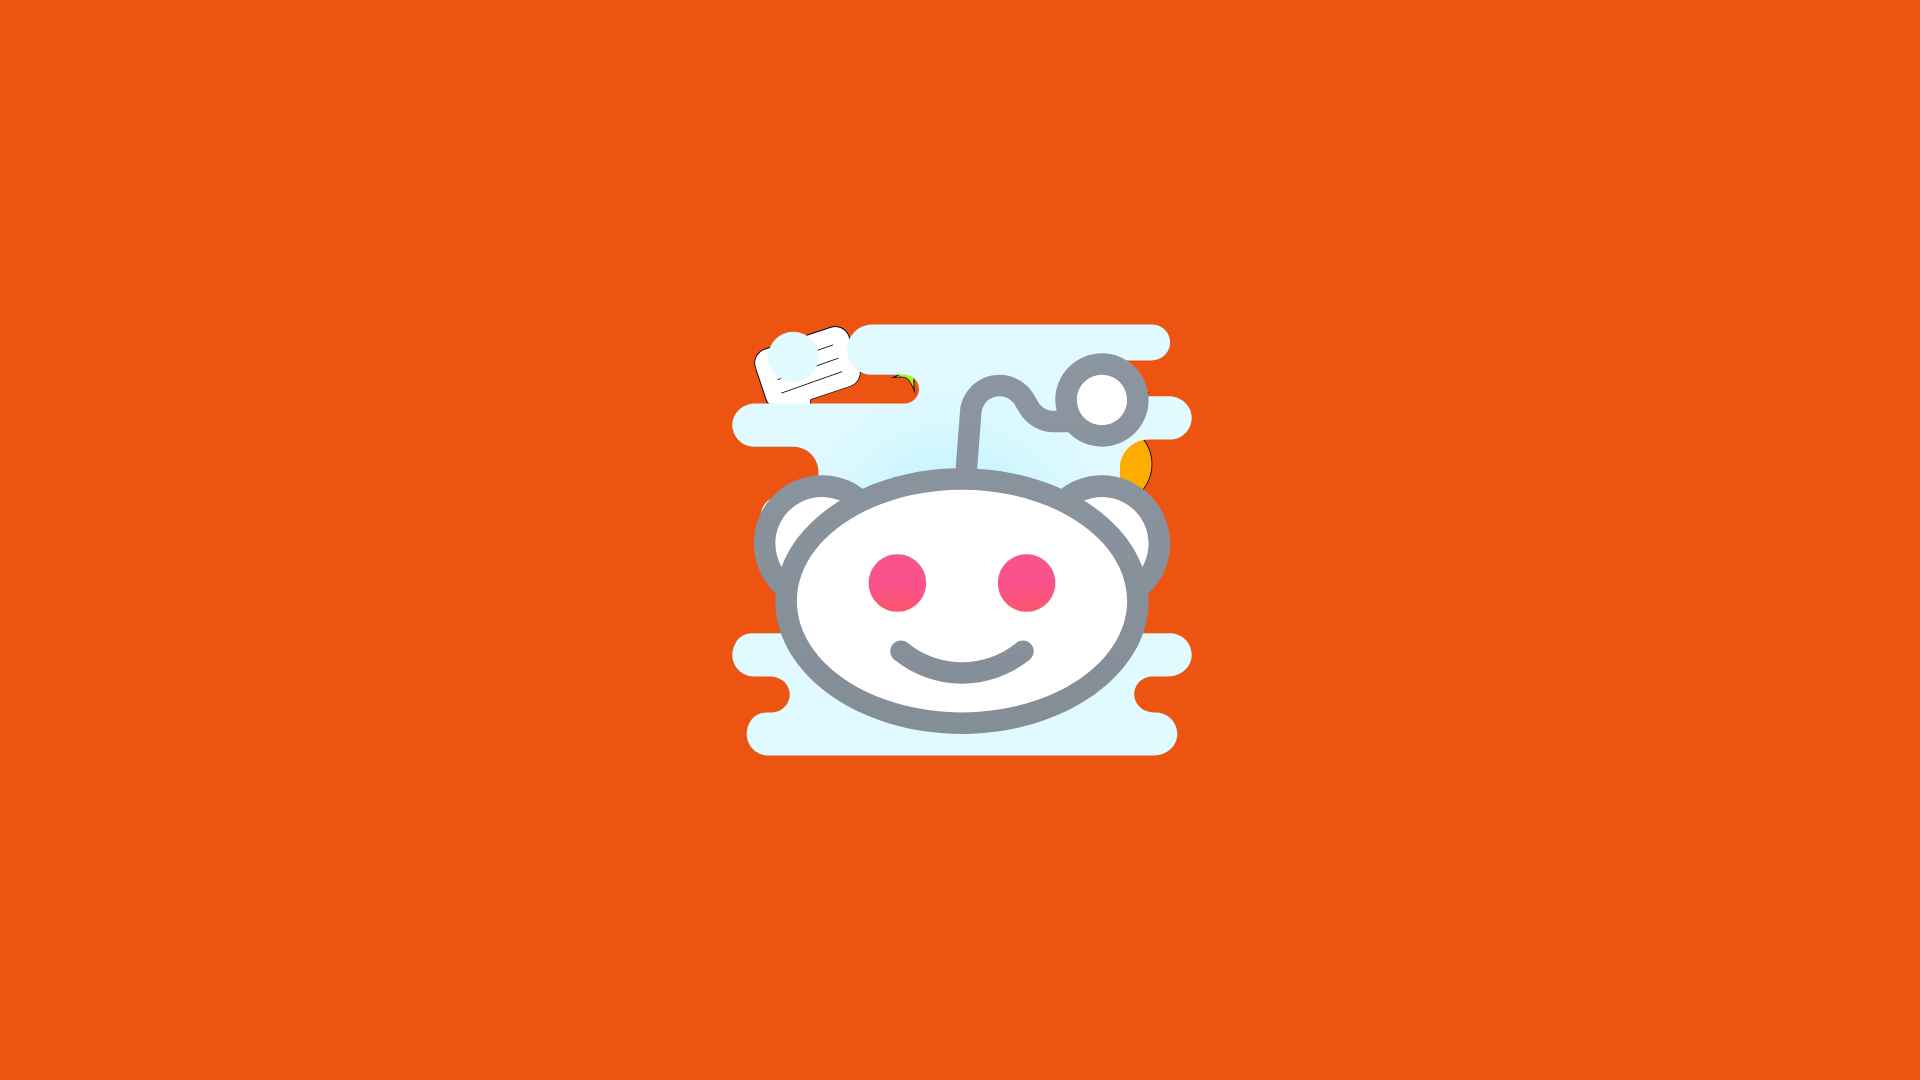 How does Reddit work and what are the main features?